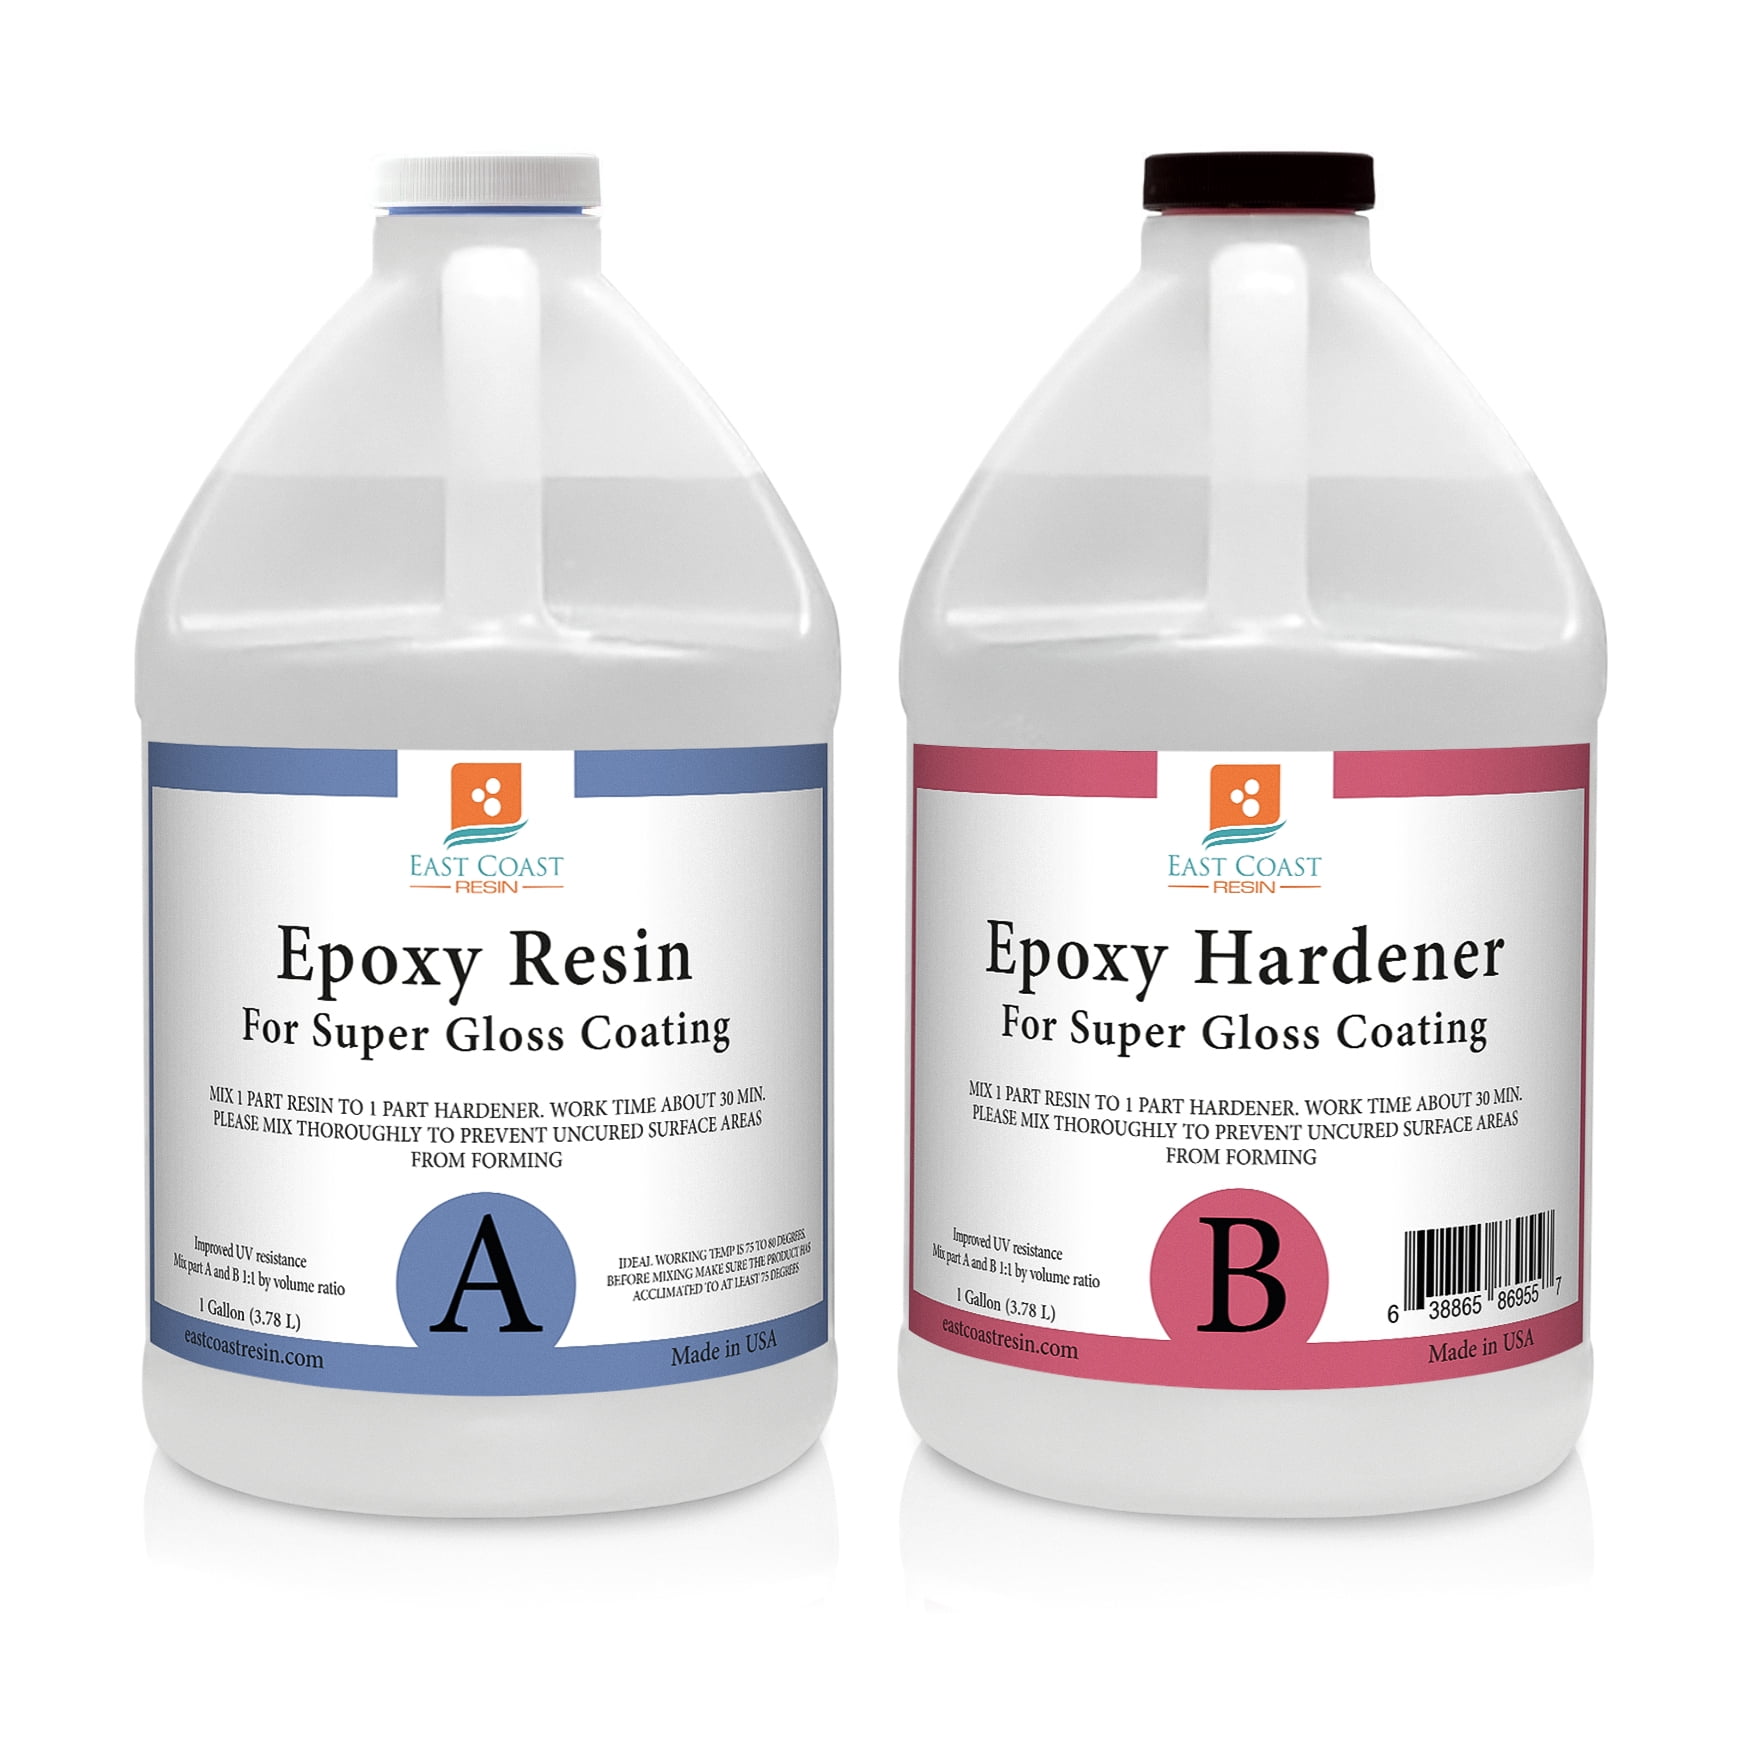 Epoxy Resin Kit for Beginners - 15.5 FL.OZ. Crystal Clear Casting